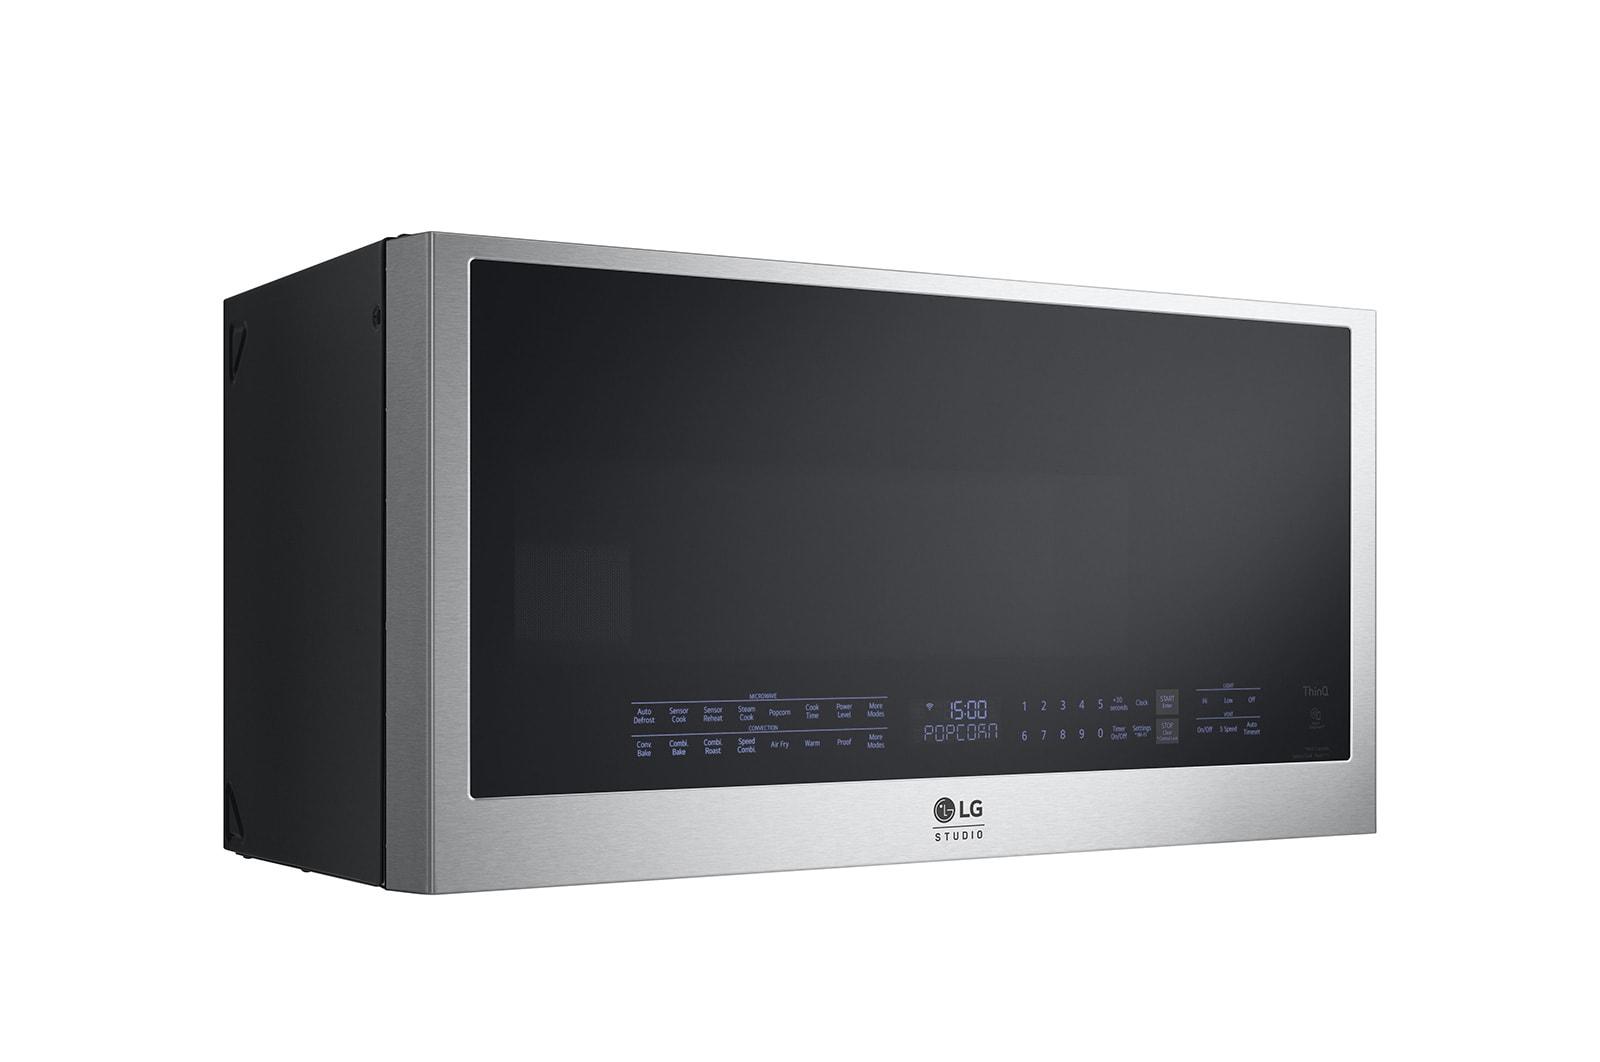 LG STUDIO 1.7 cu. ft. Over-the-Range Convection Microwave Oven with Air Fry